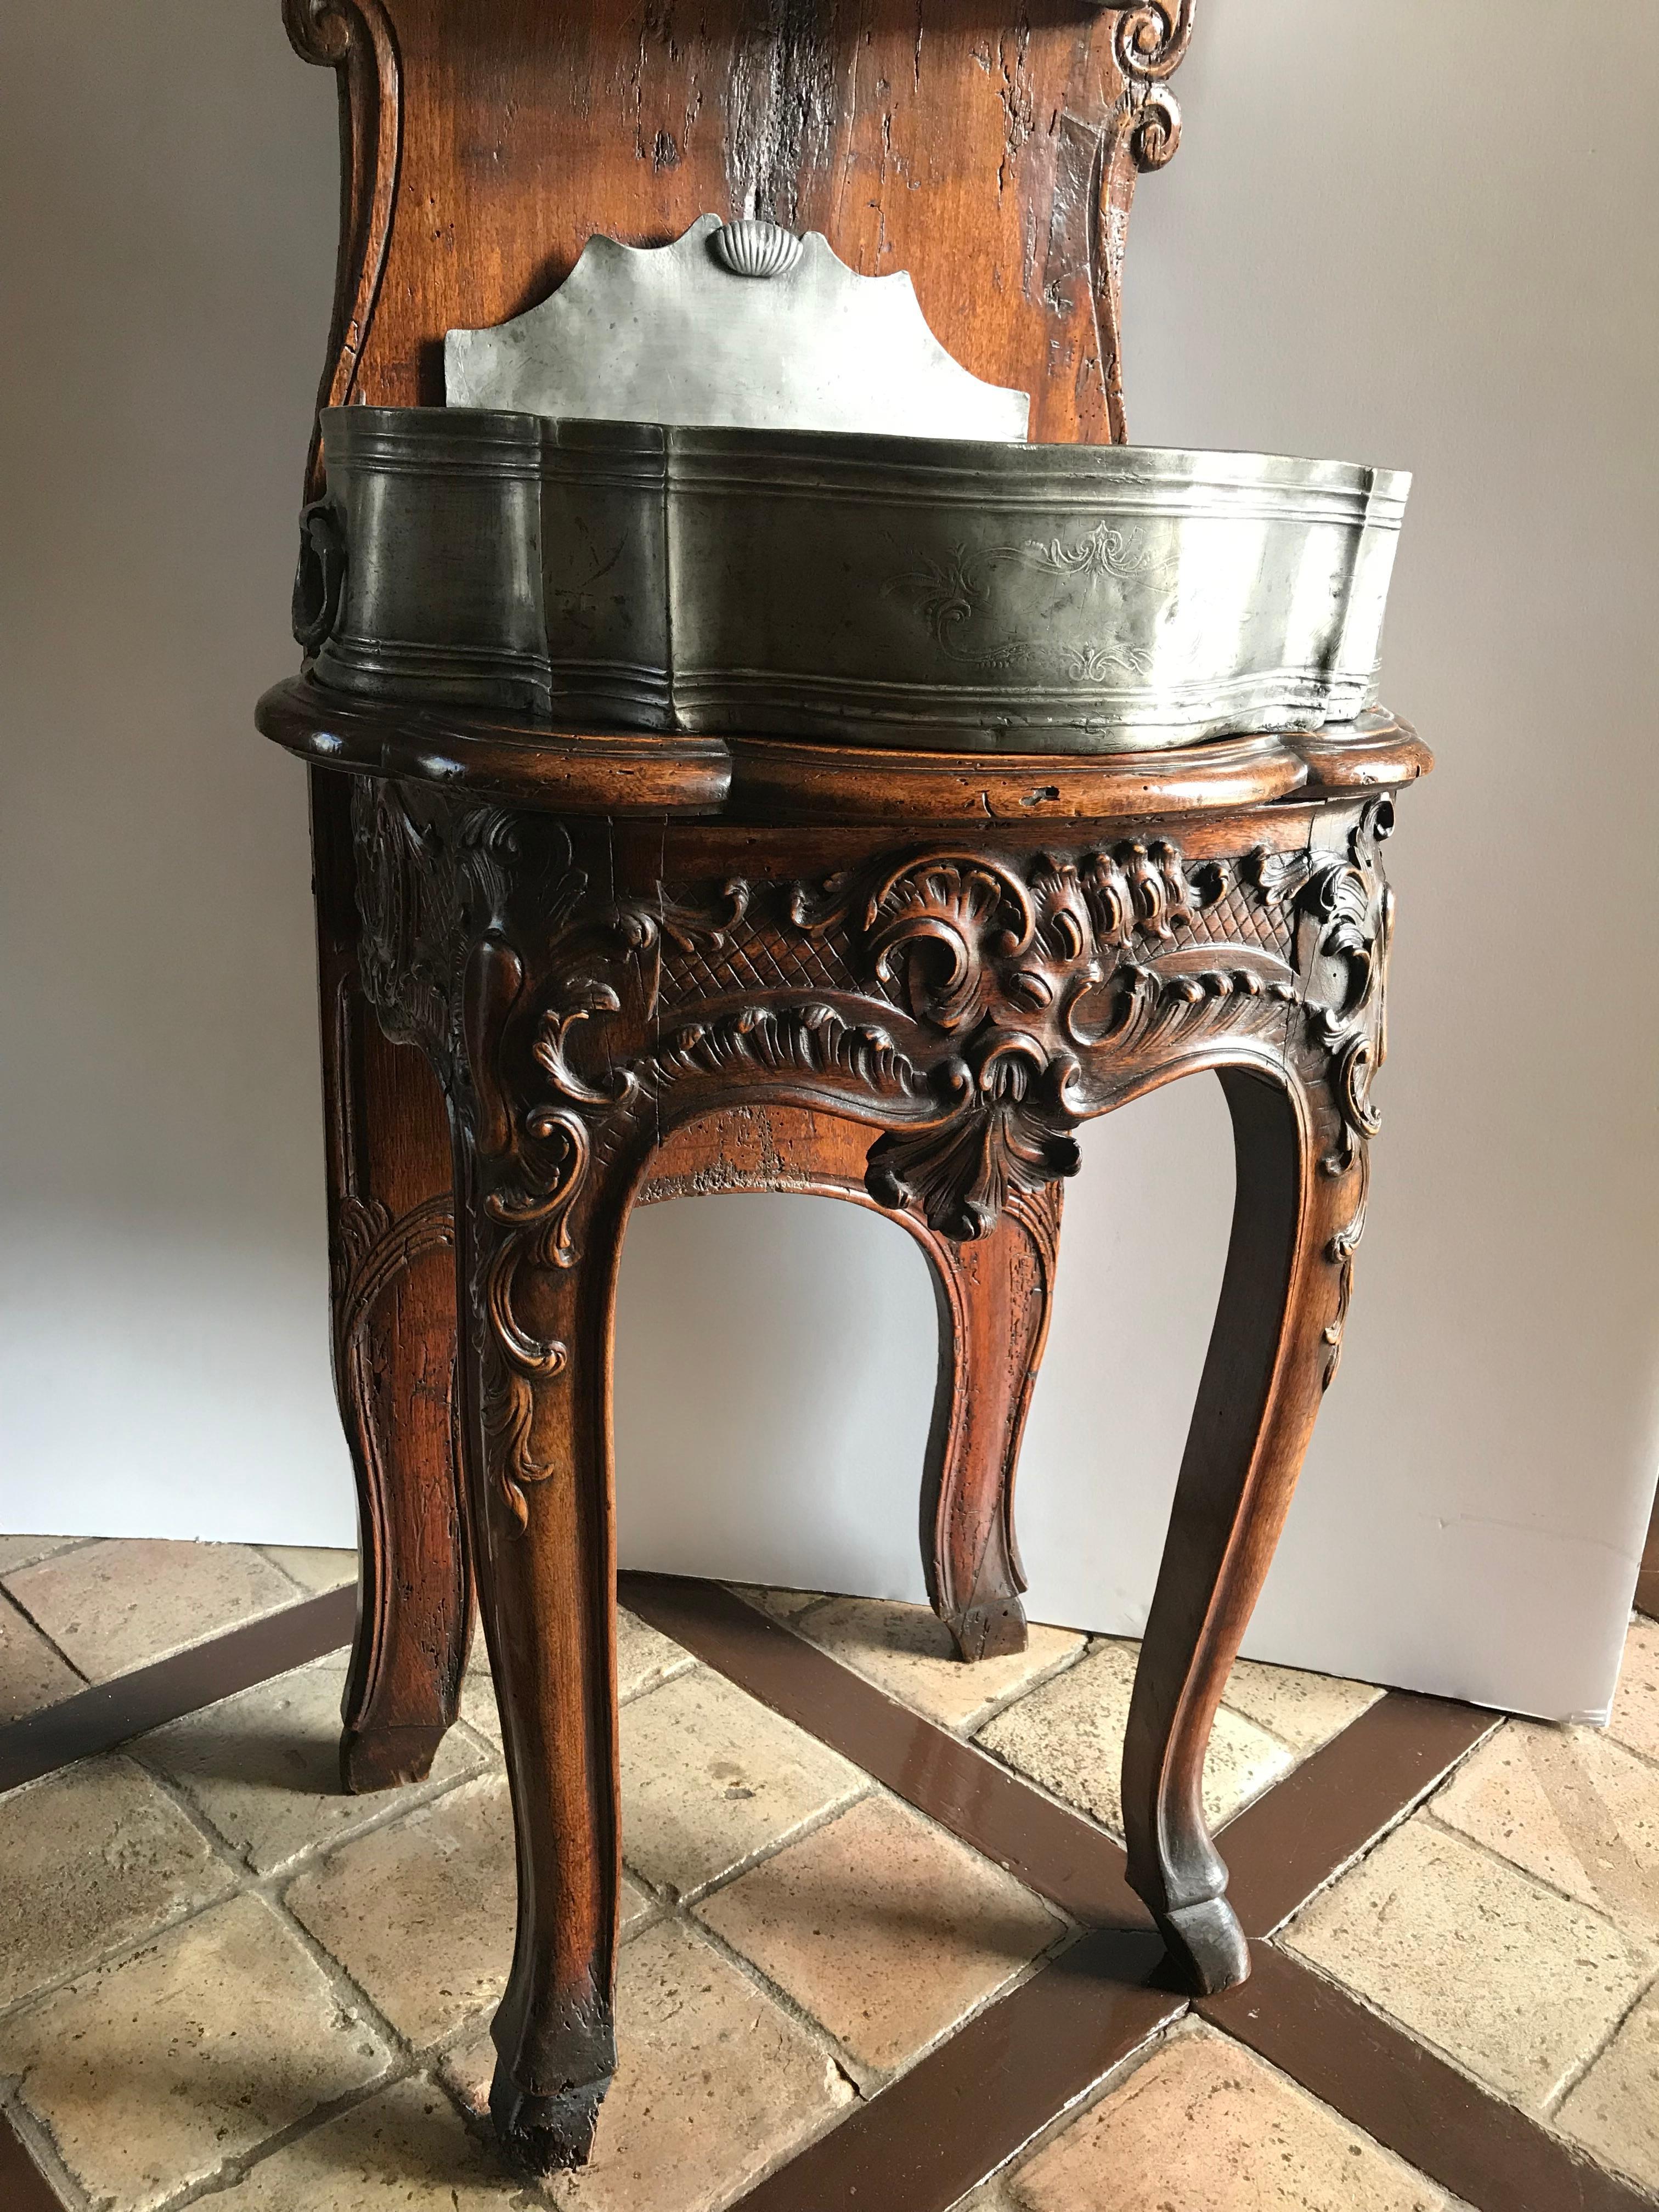 French 18th C. Lavabo Wall Fountain Pewter Basin sink on Hand Carved Wood Stand Antique For Sale